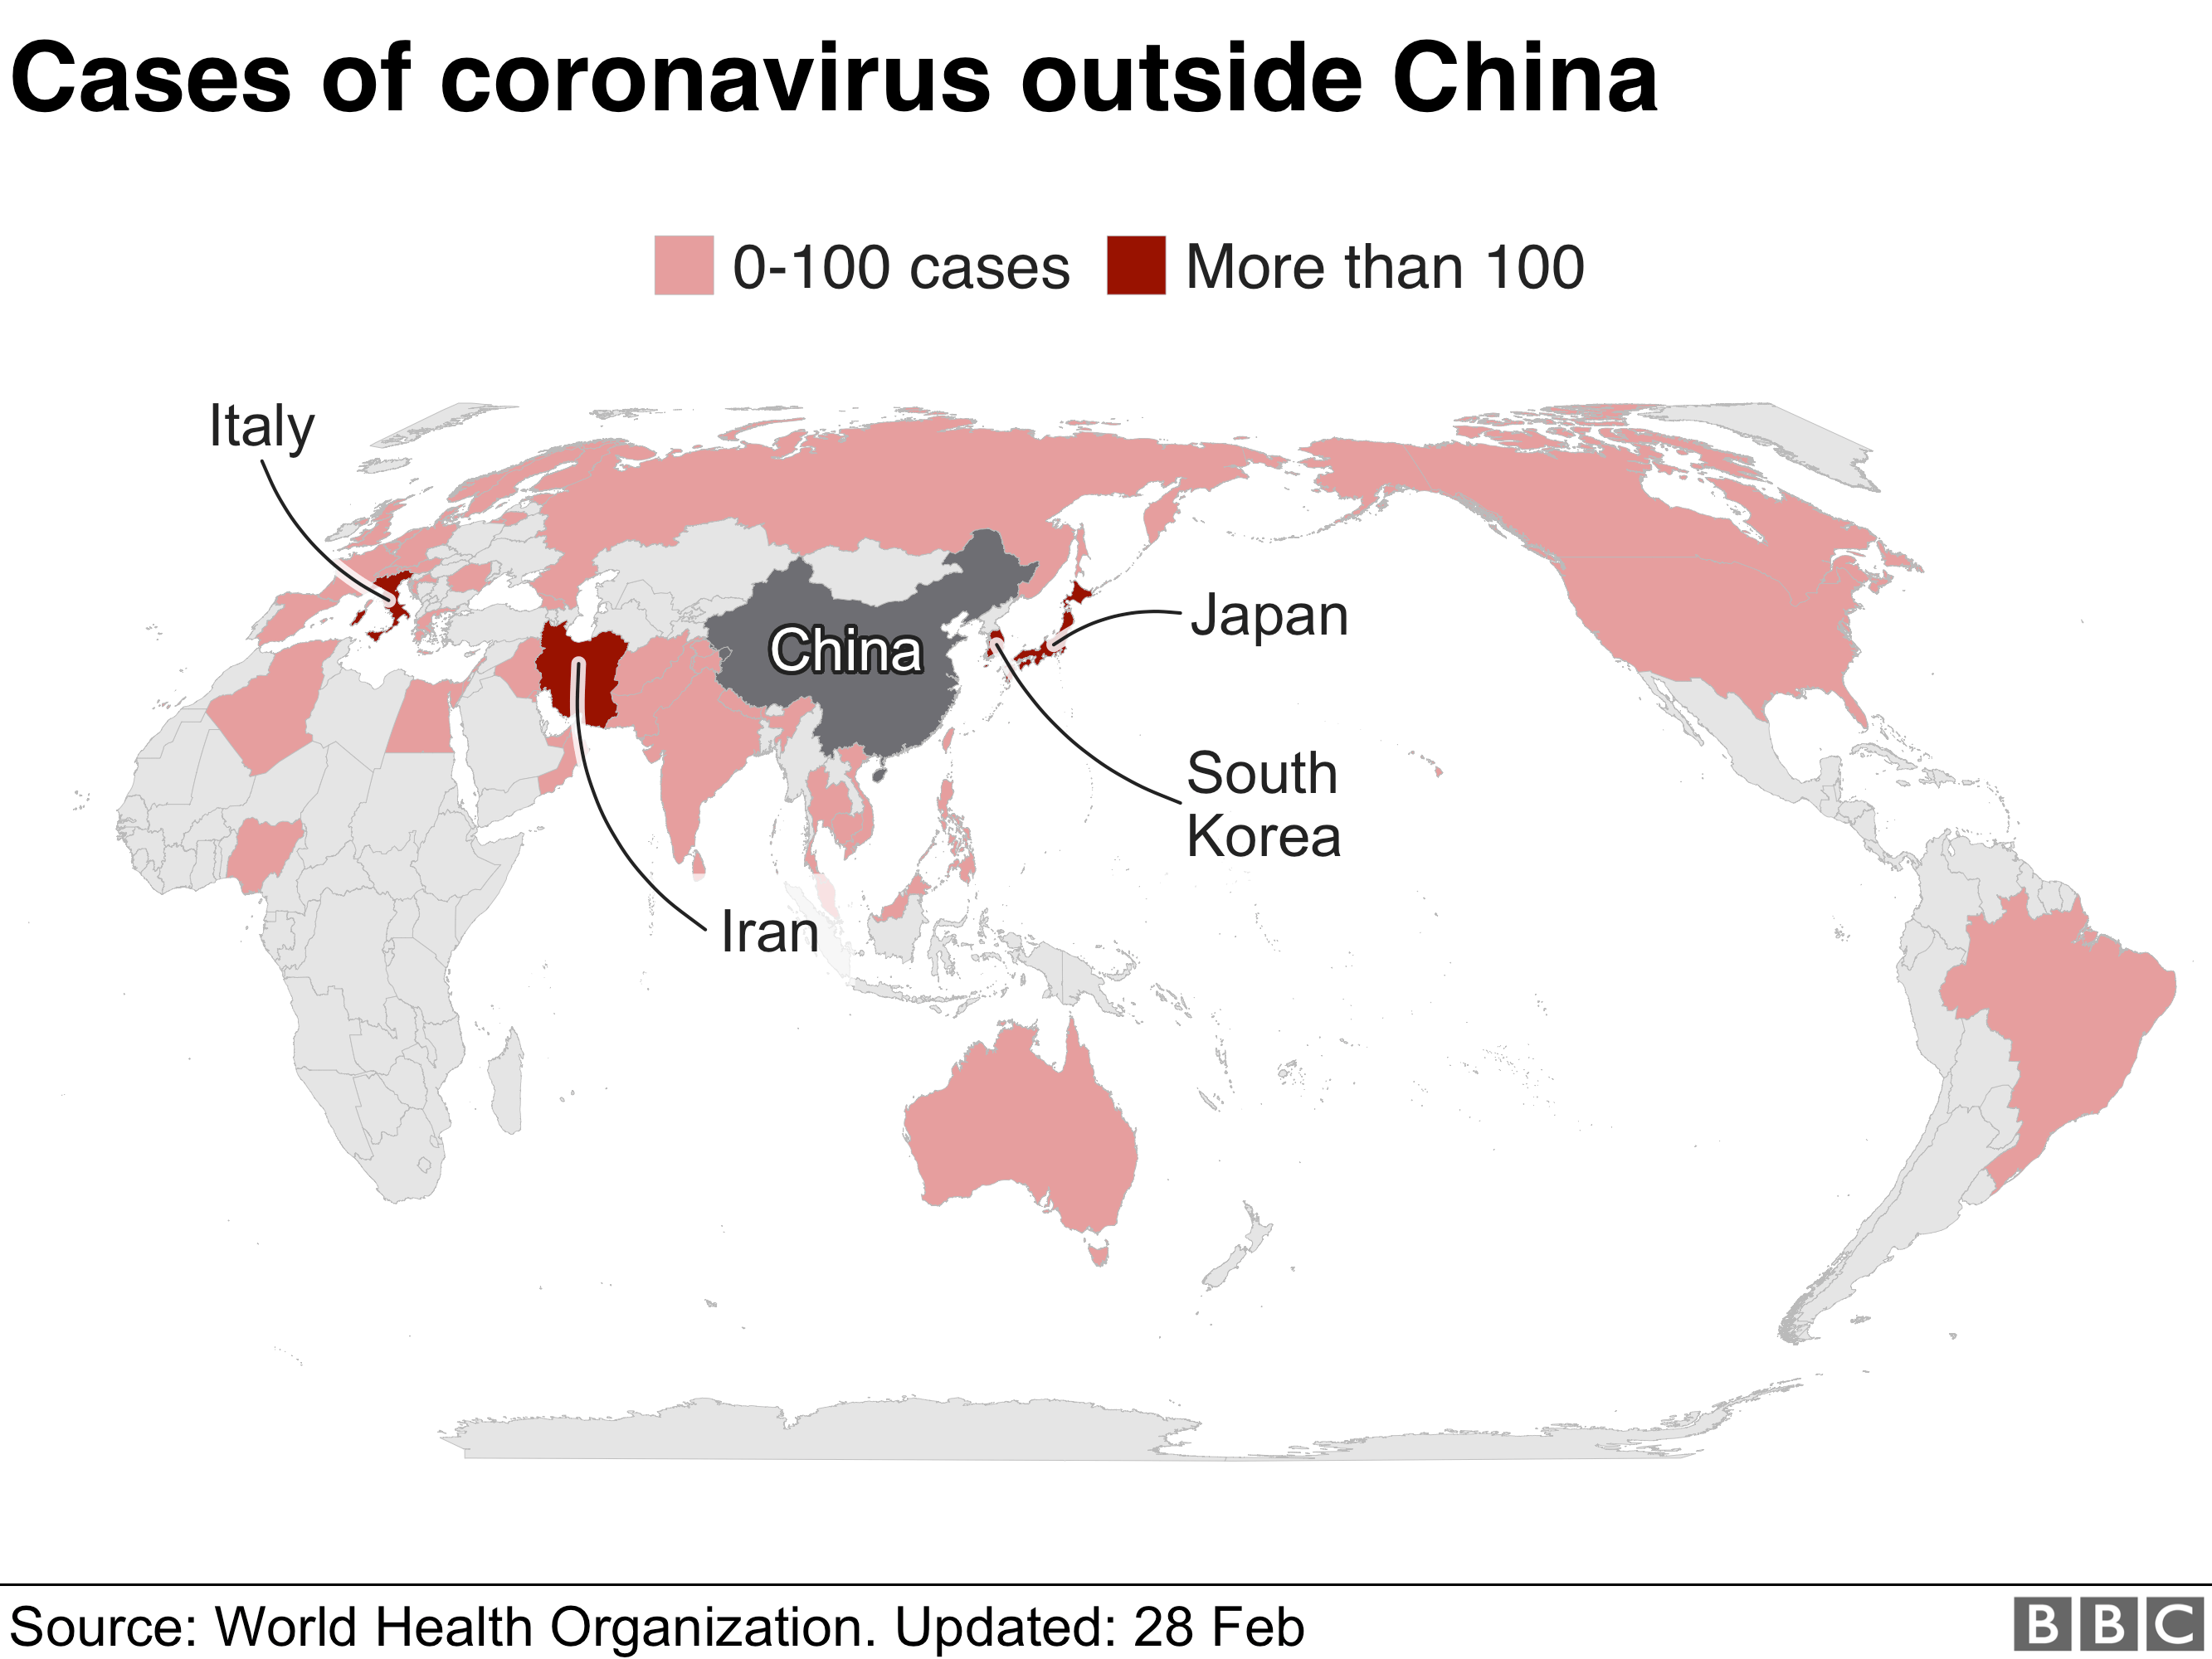 Map showing the countries affected by coronavirus outside China